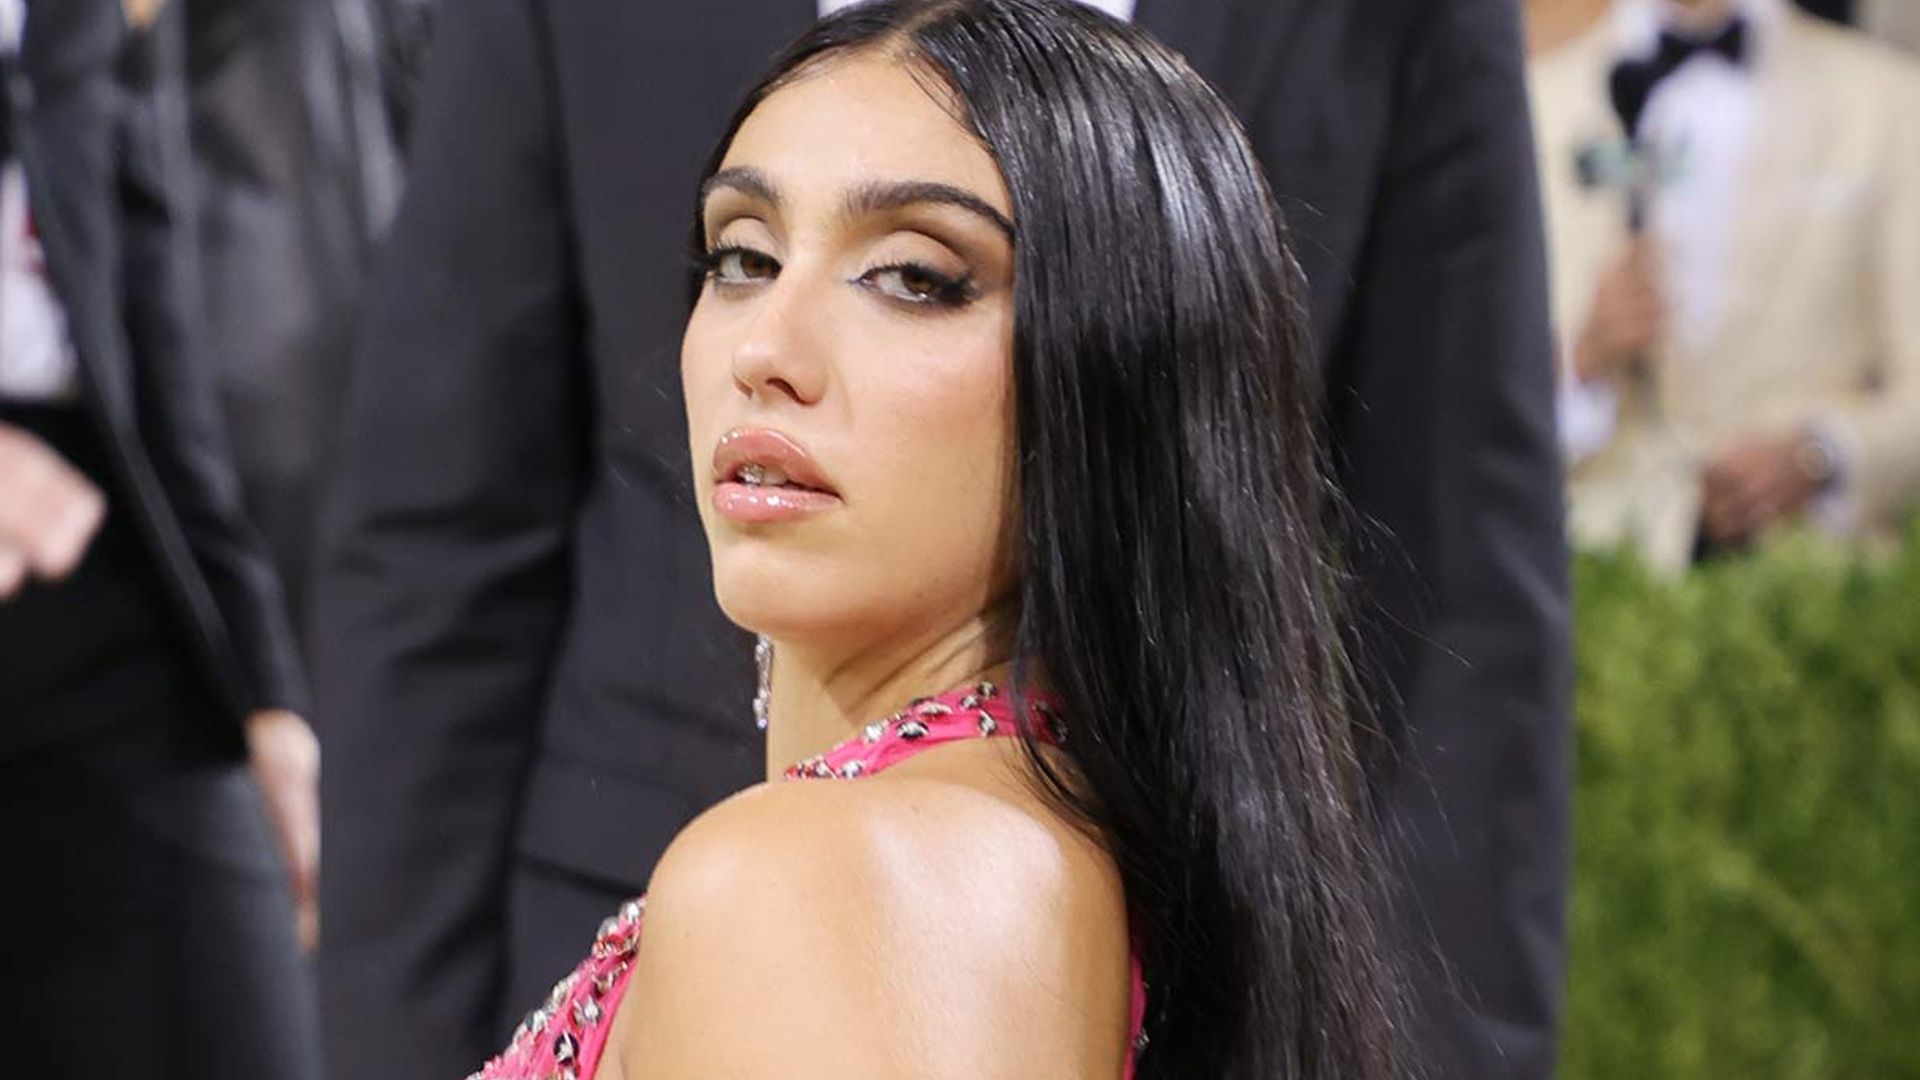 Lourdes Leon commands attention in latex lingerie and thigh-high boots